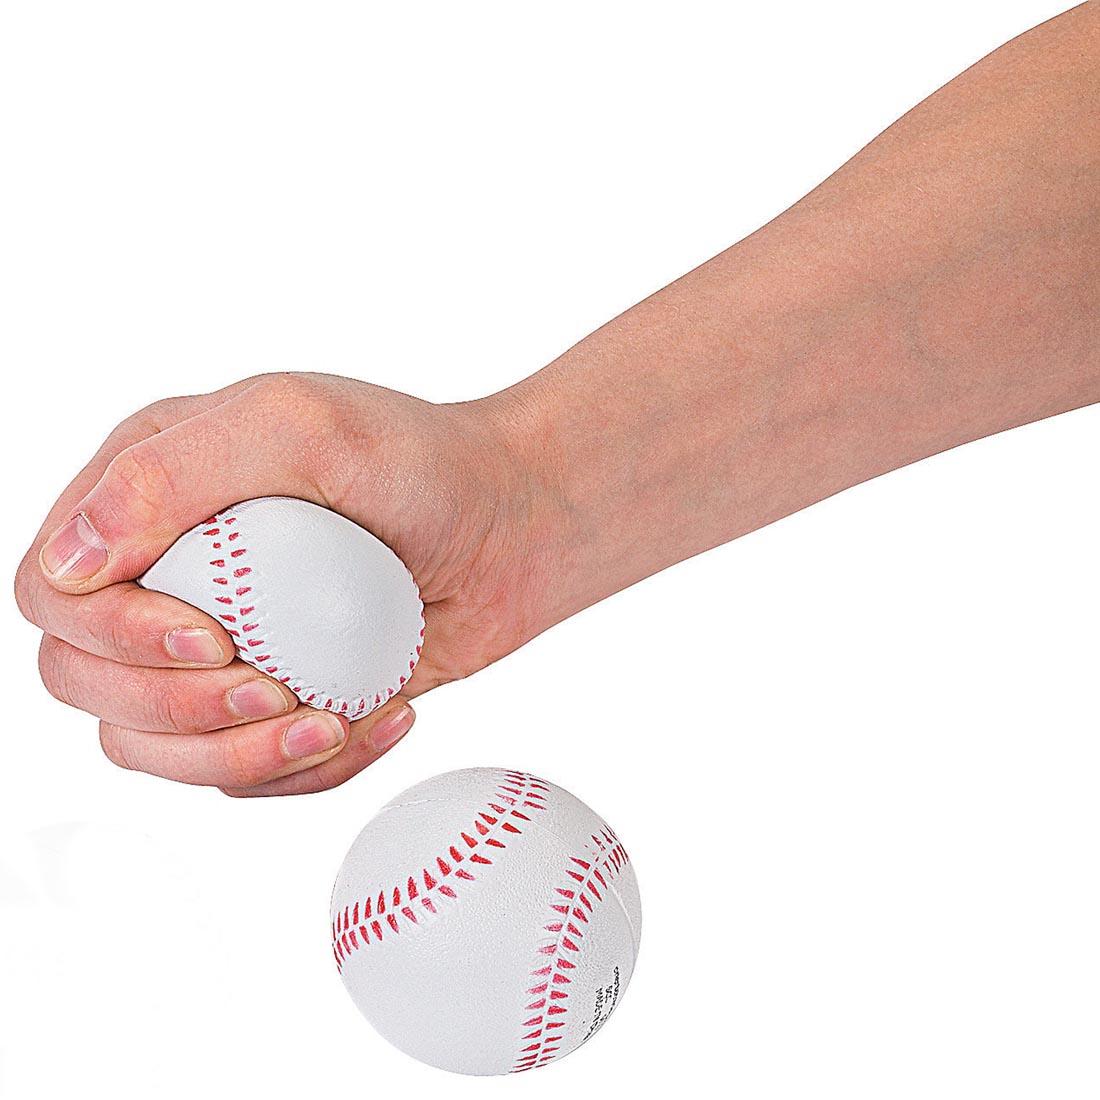 two Foam Realistic Baseball Stress Balls by Fun Express with a hand squeezing one of them